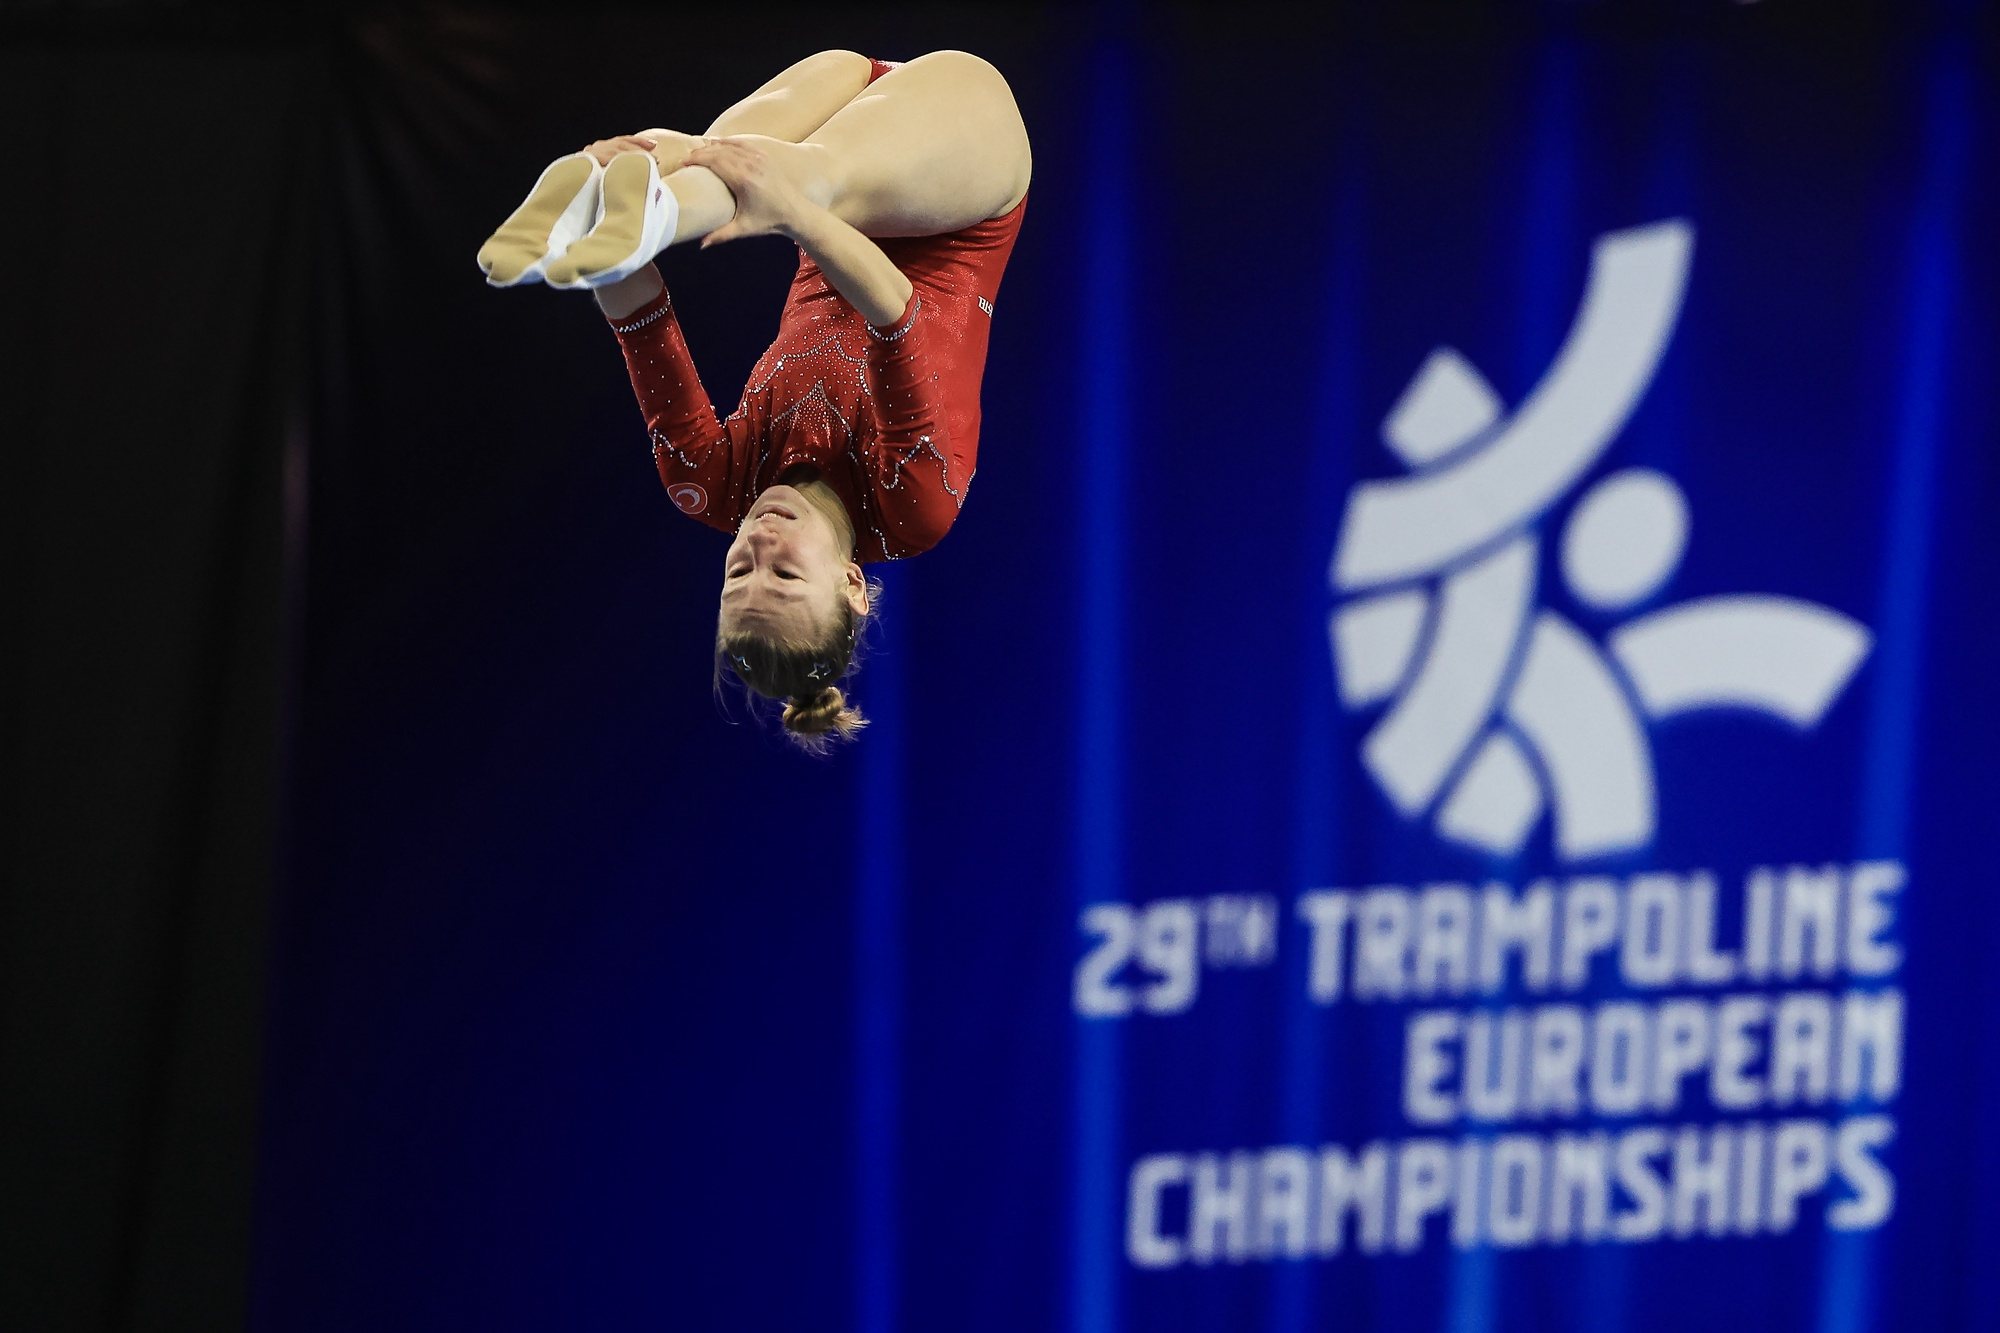 Athletes perform during the 2024 European Championships in Trampoline, Double Mini-Trampoline and Tumbling, held at Multiusos pavillion, in Guimaraes, Portugal, 4 April 2024. JOSE COELHO/LUSA